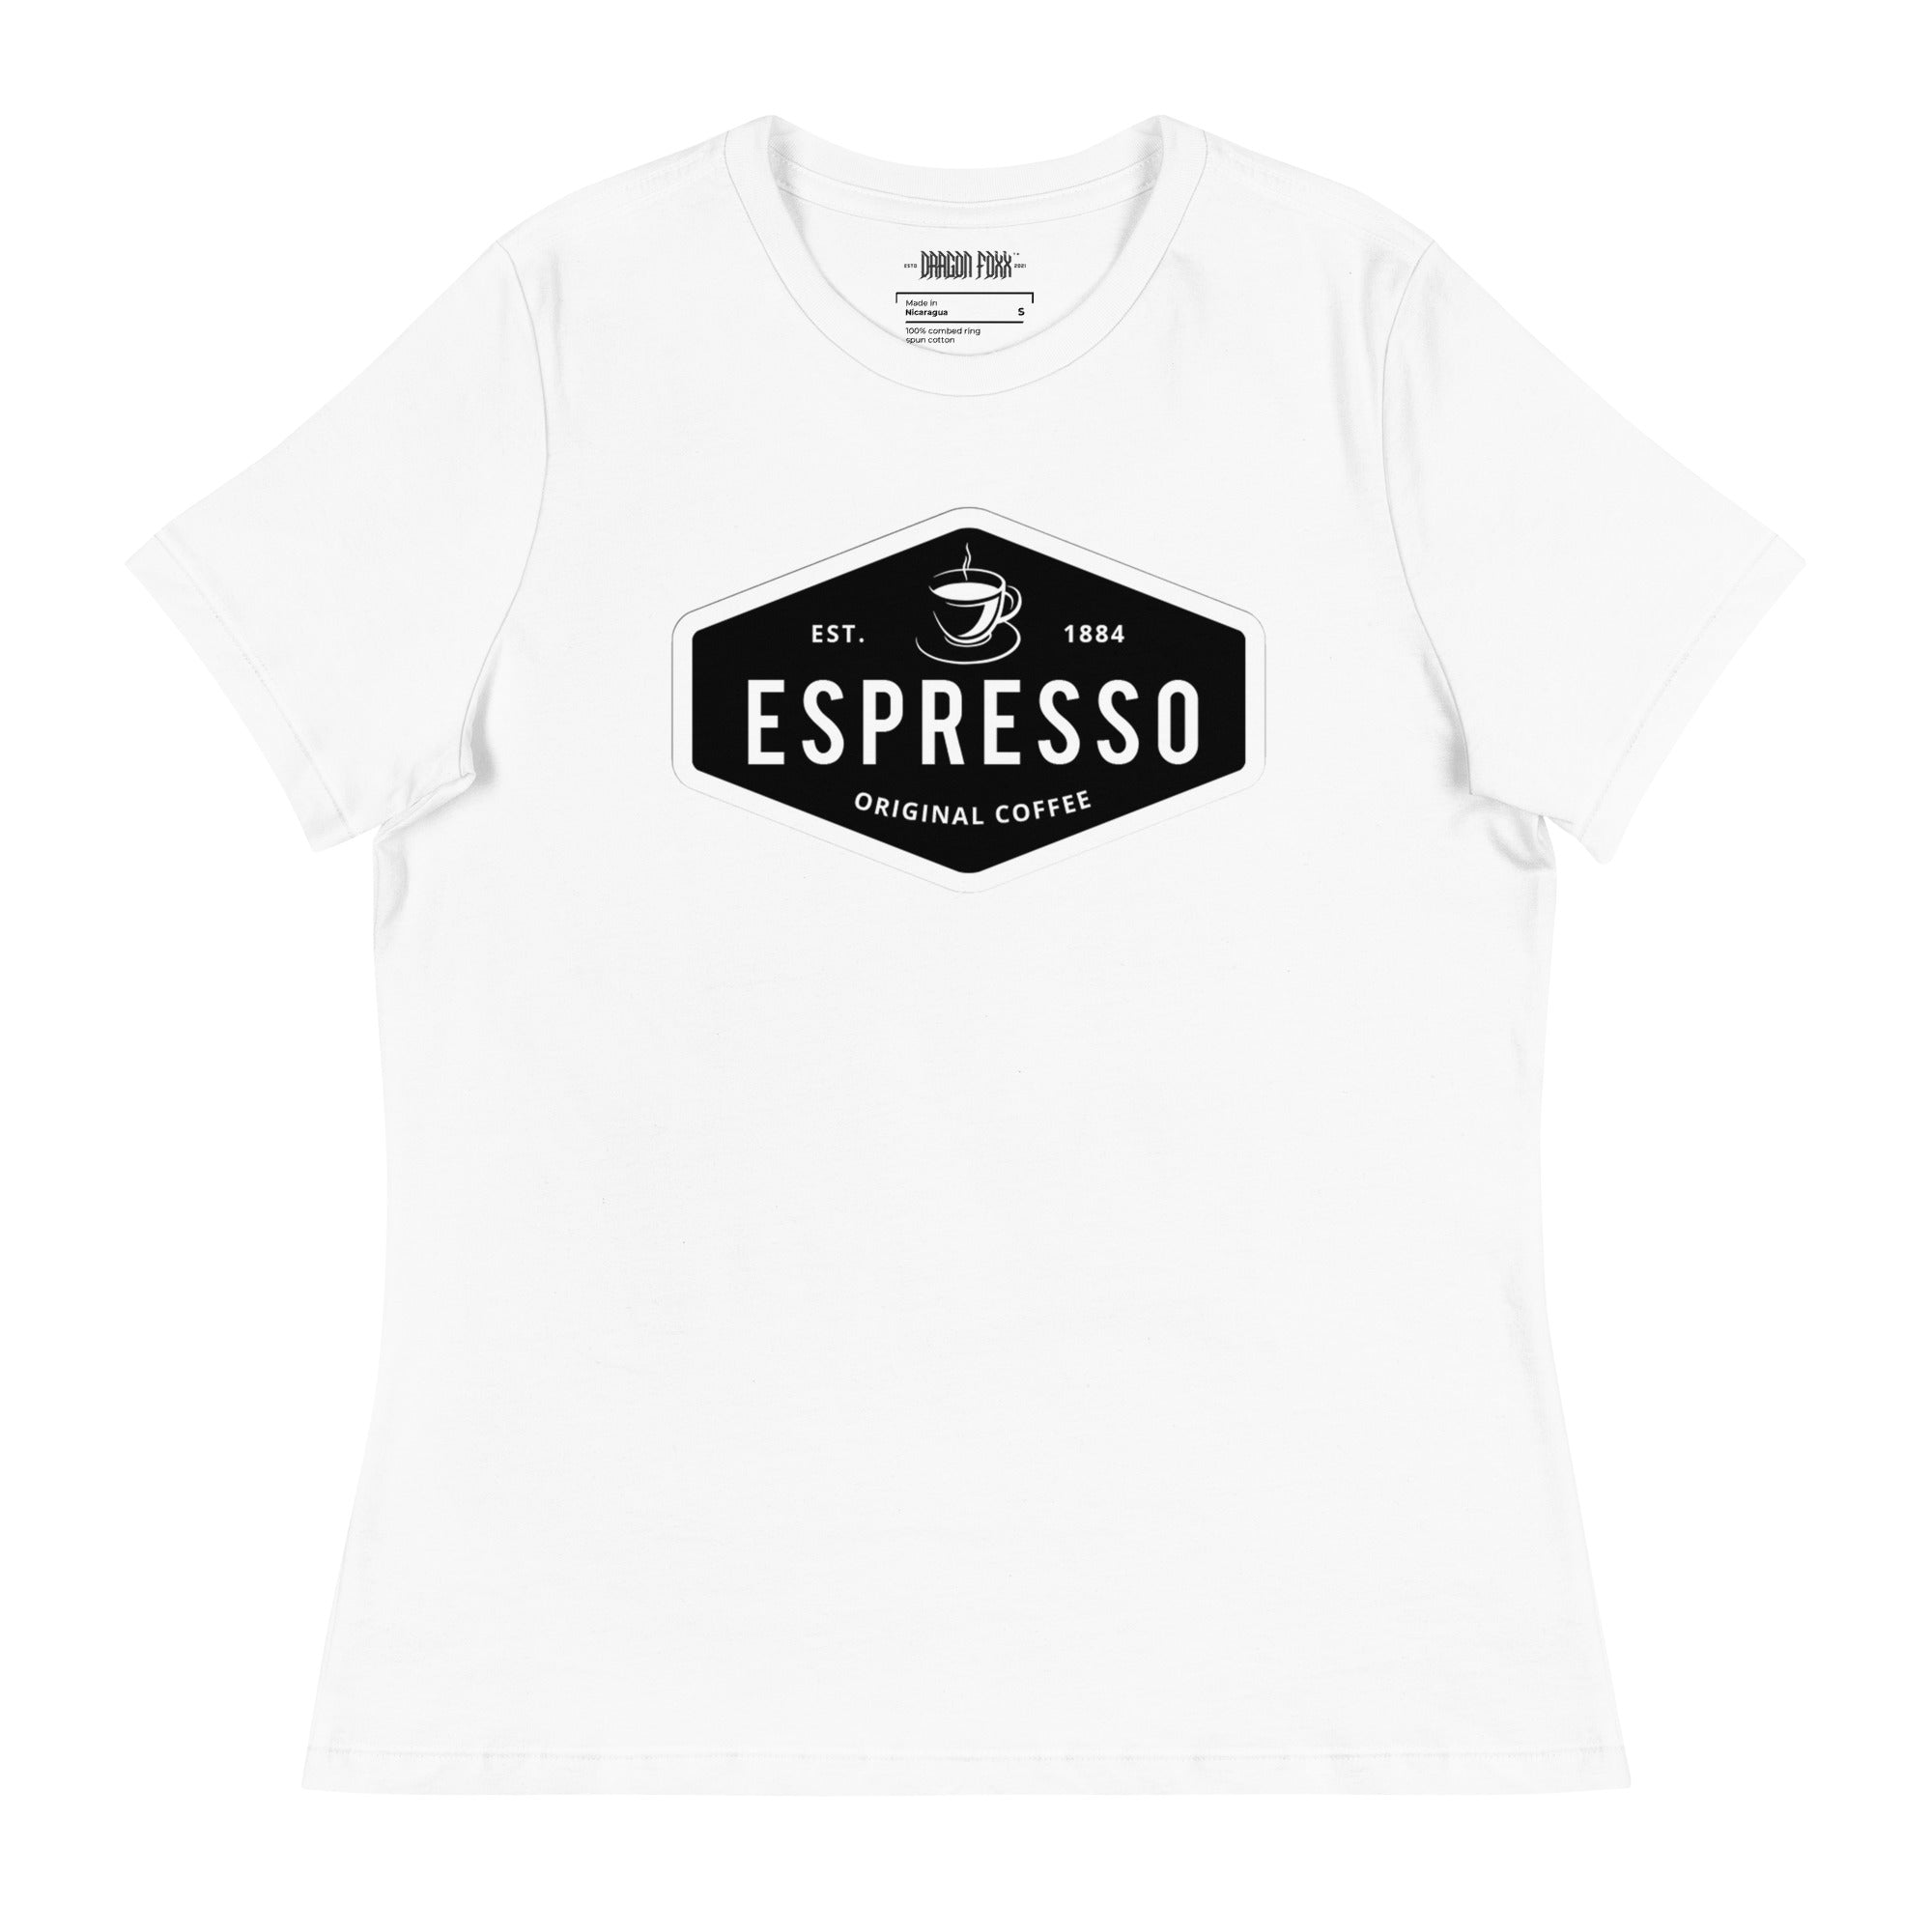 ESPRESSO - Women's Relaxed Fit Graphic T-Shirt in 16 Colors - Women's Relaxed Fit Graphic T-Shirt - DRAGON FOXX™ - 7218598_10252 - White - S - Athletic Heather T-shirt - Berry T-shirt - Black T-shirt